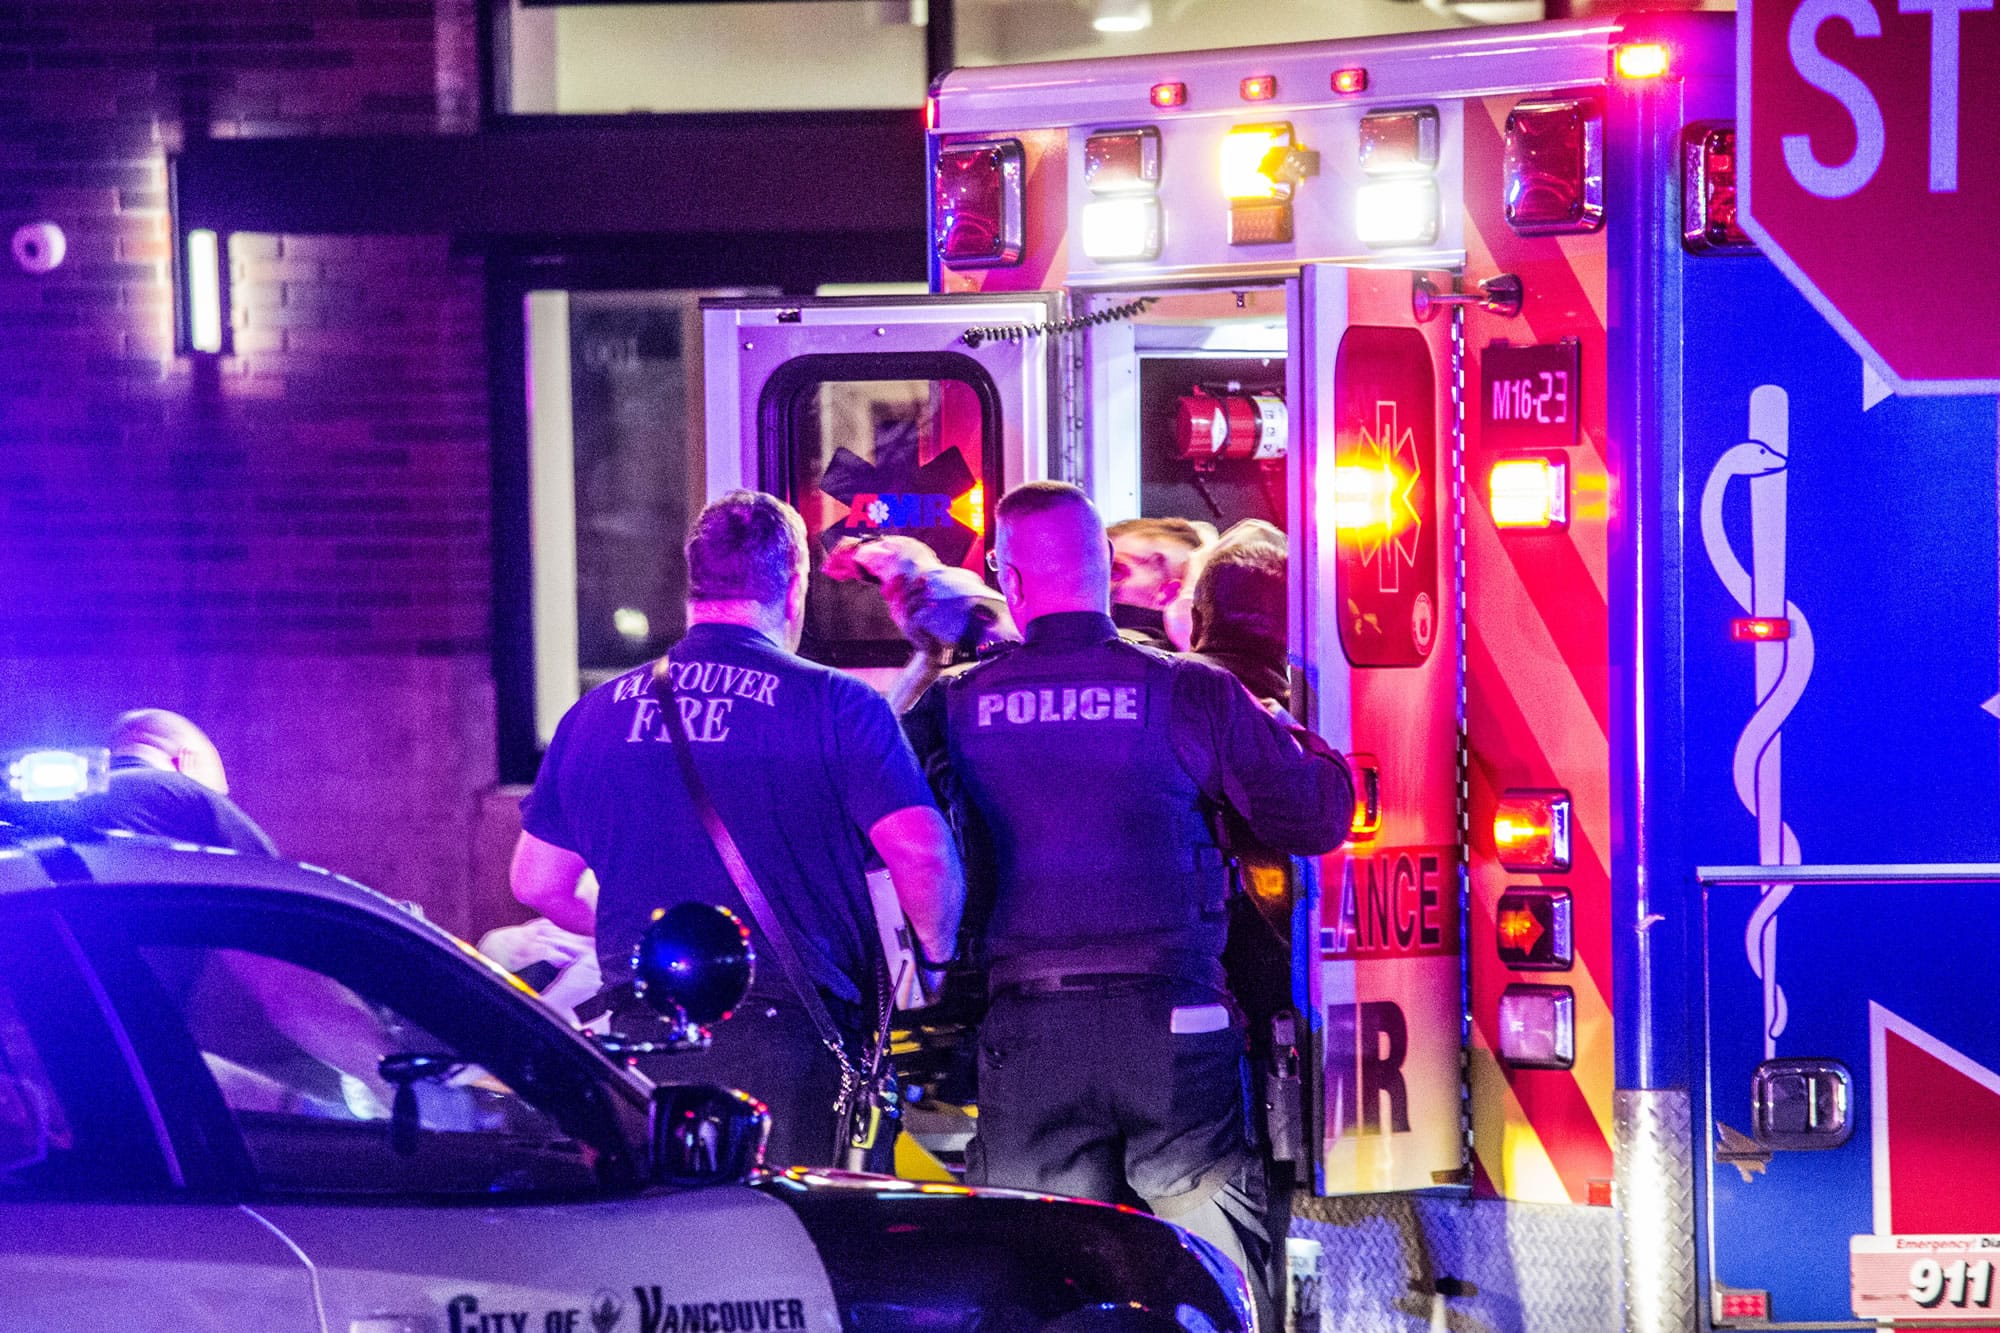 A Vancouver police officer is loaded into an ambulance after sustaining injuries during an altercation with an alleged aggressive panhandler Friday night near the corners of Sixth and Main streets in downtown Vancouver. The officer, who has not been identified, was treated at a local hospital and released, according to Vancouver police.